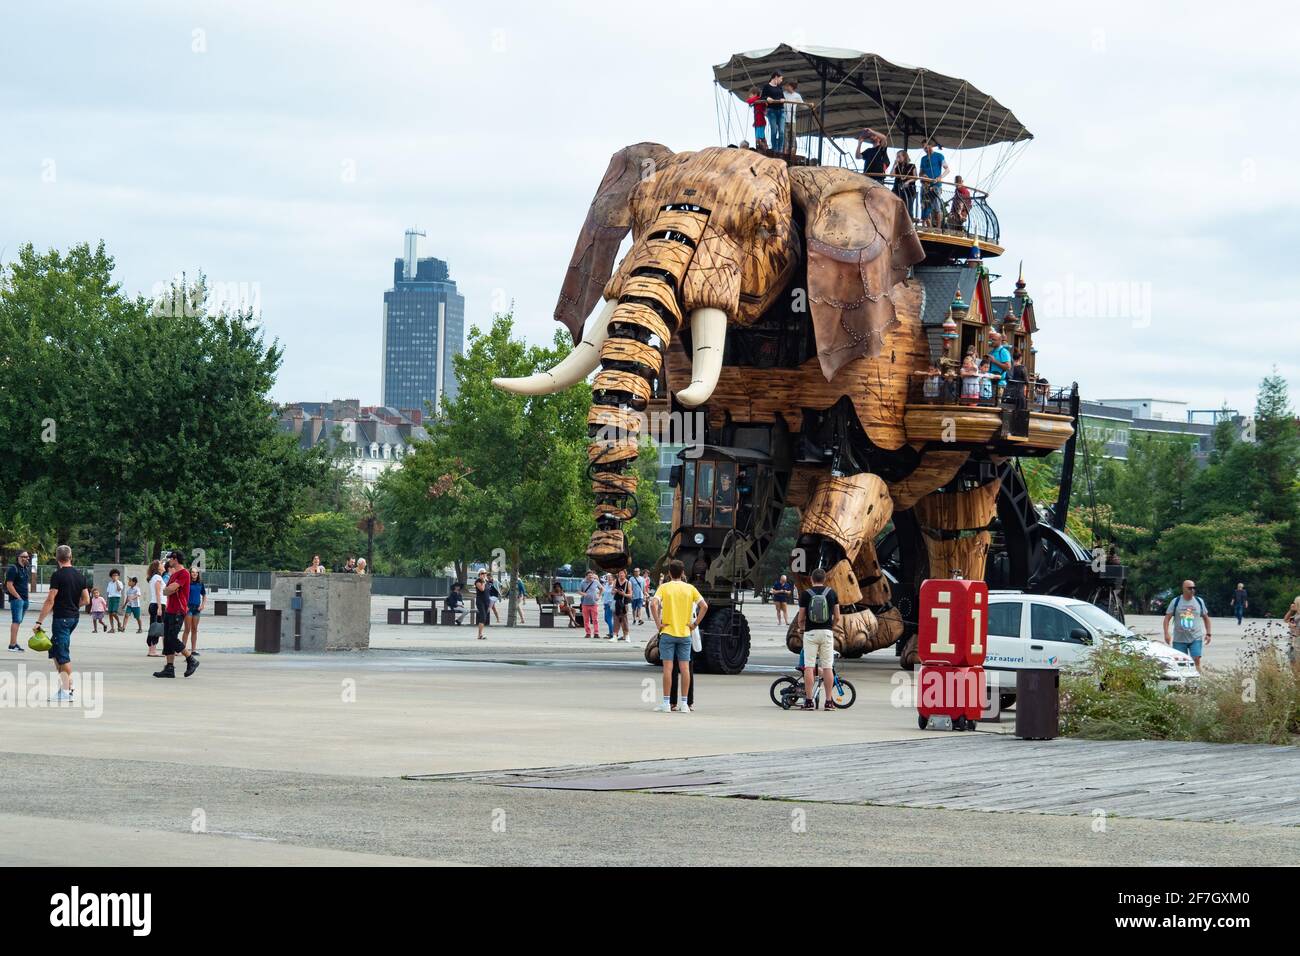 Nantes, France - August 20th 2018: A wooden elephant for tourists Stock Photo